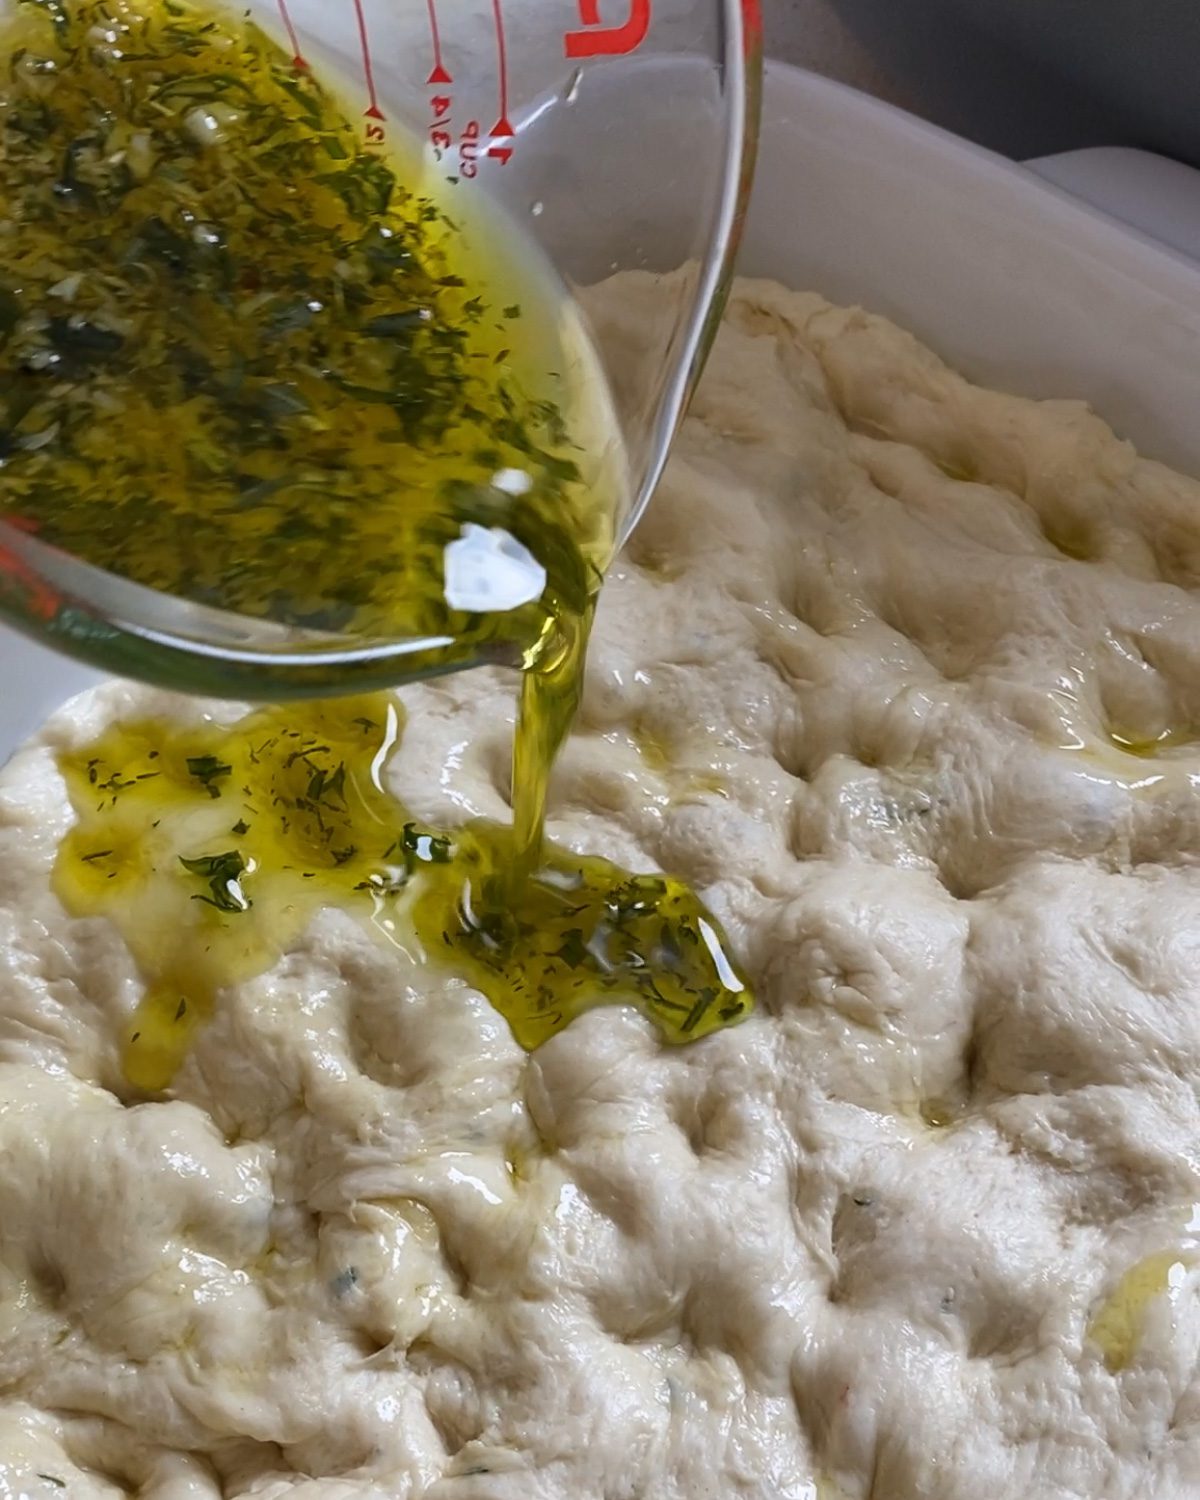 process of adding oil and herb mixture on top of dough